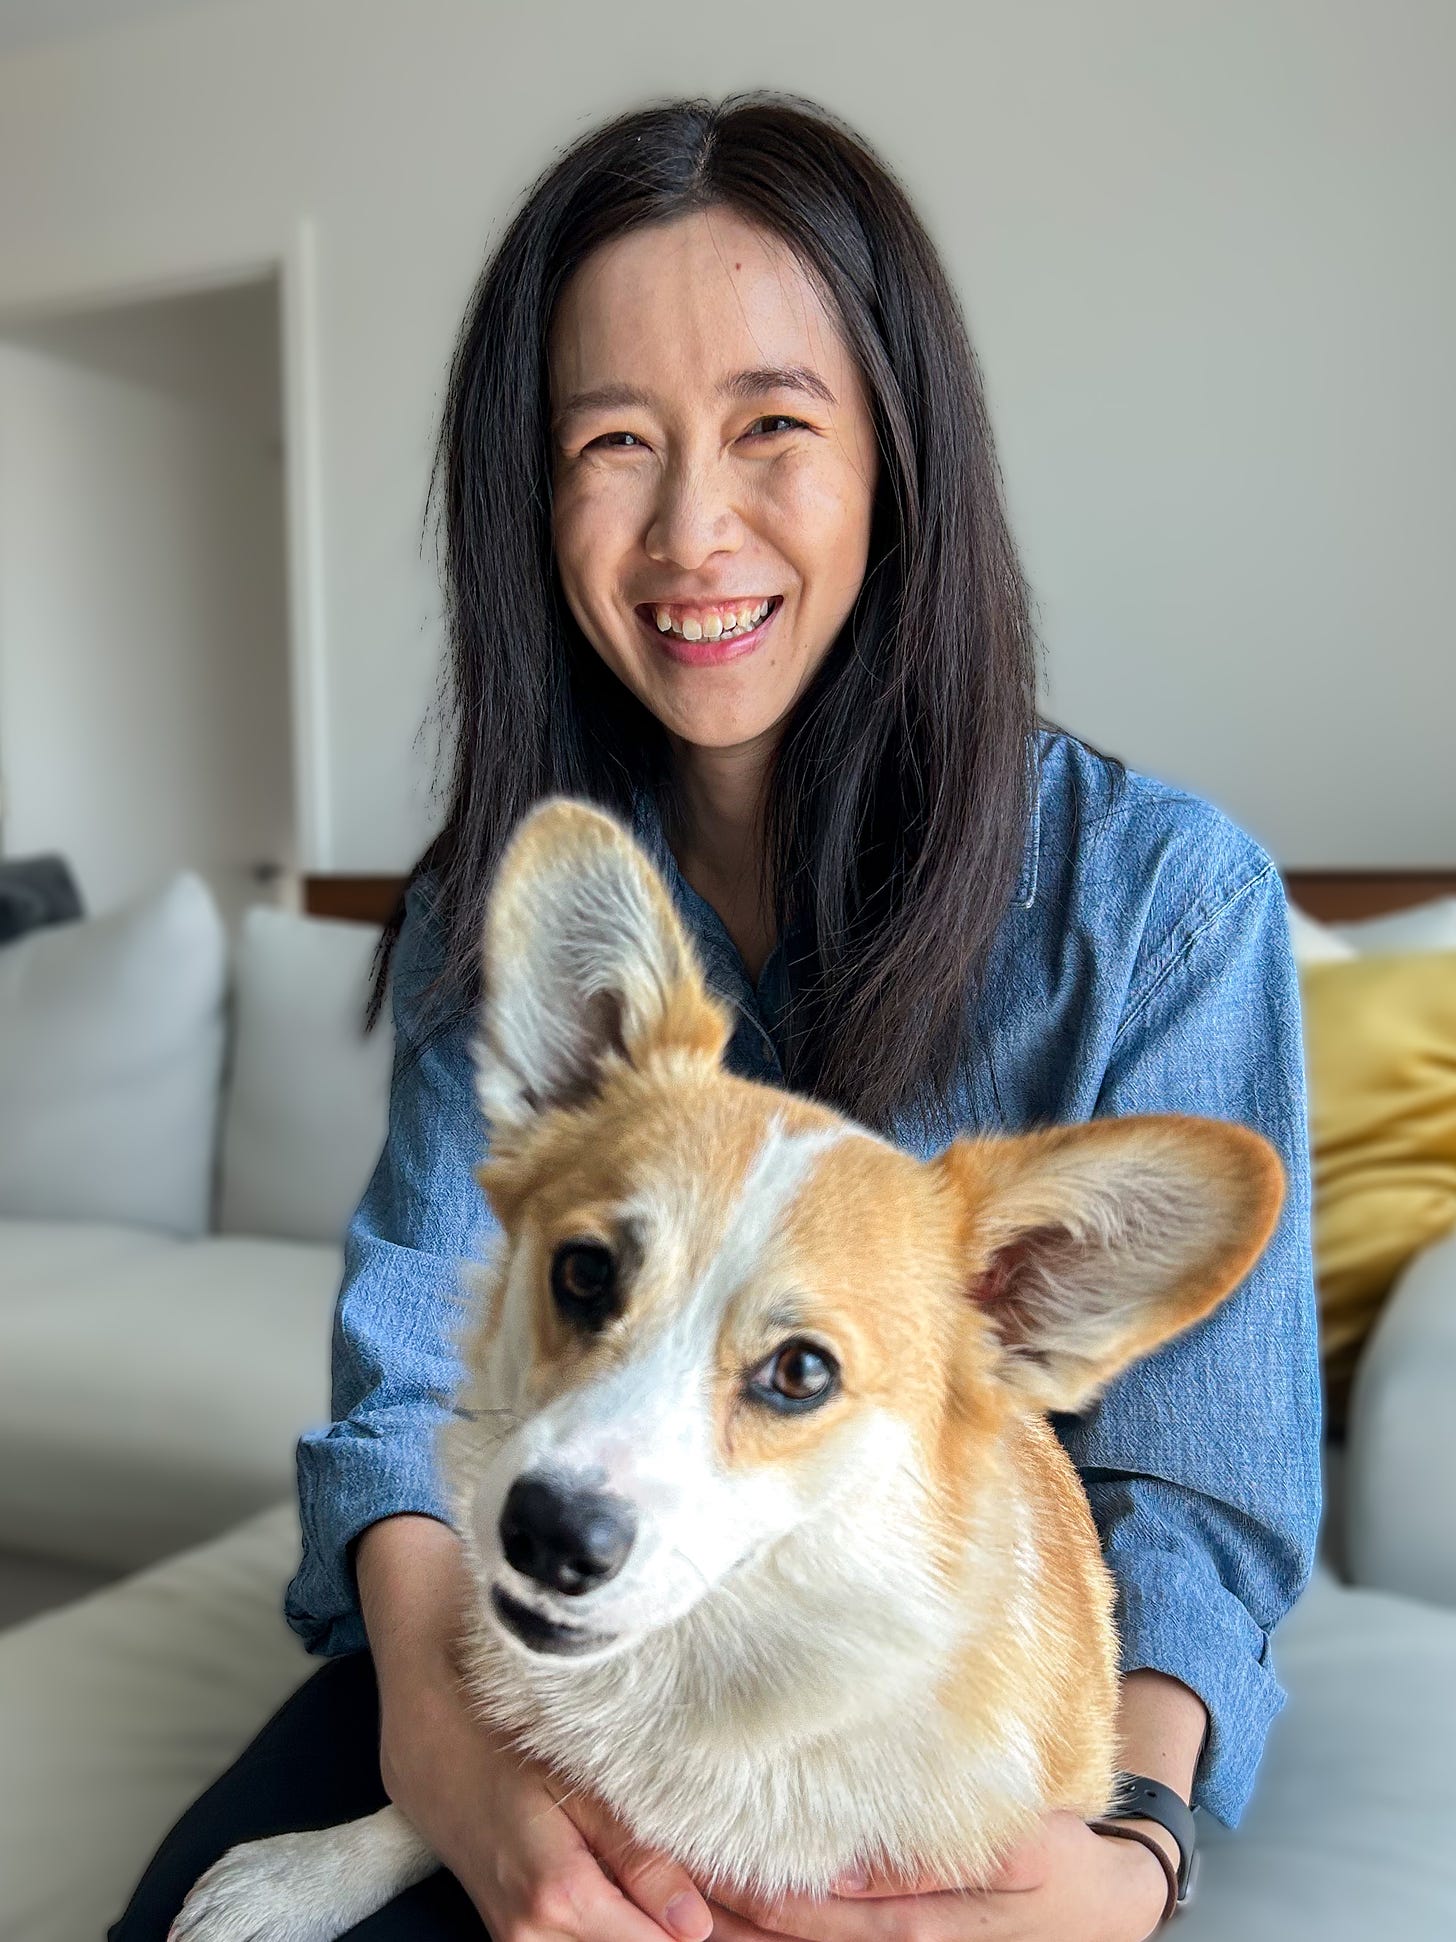 Woman with black hair smiling at the camera with a corgi on her lap